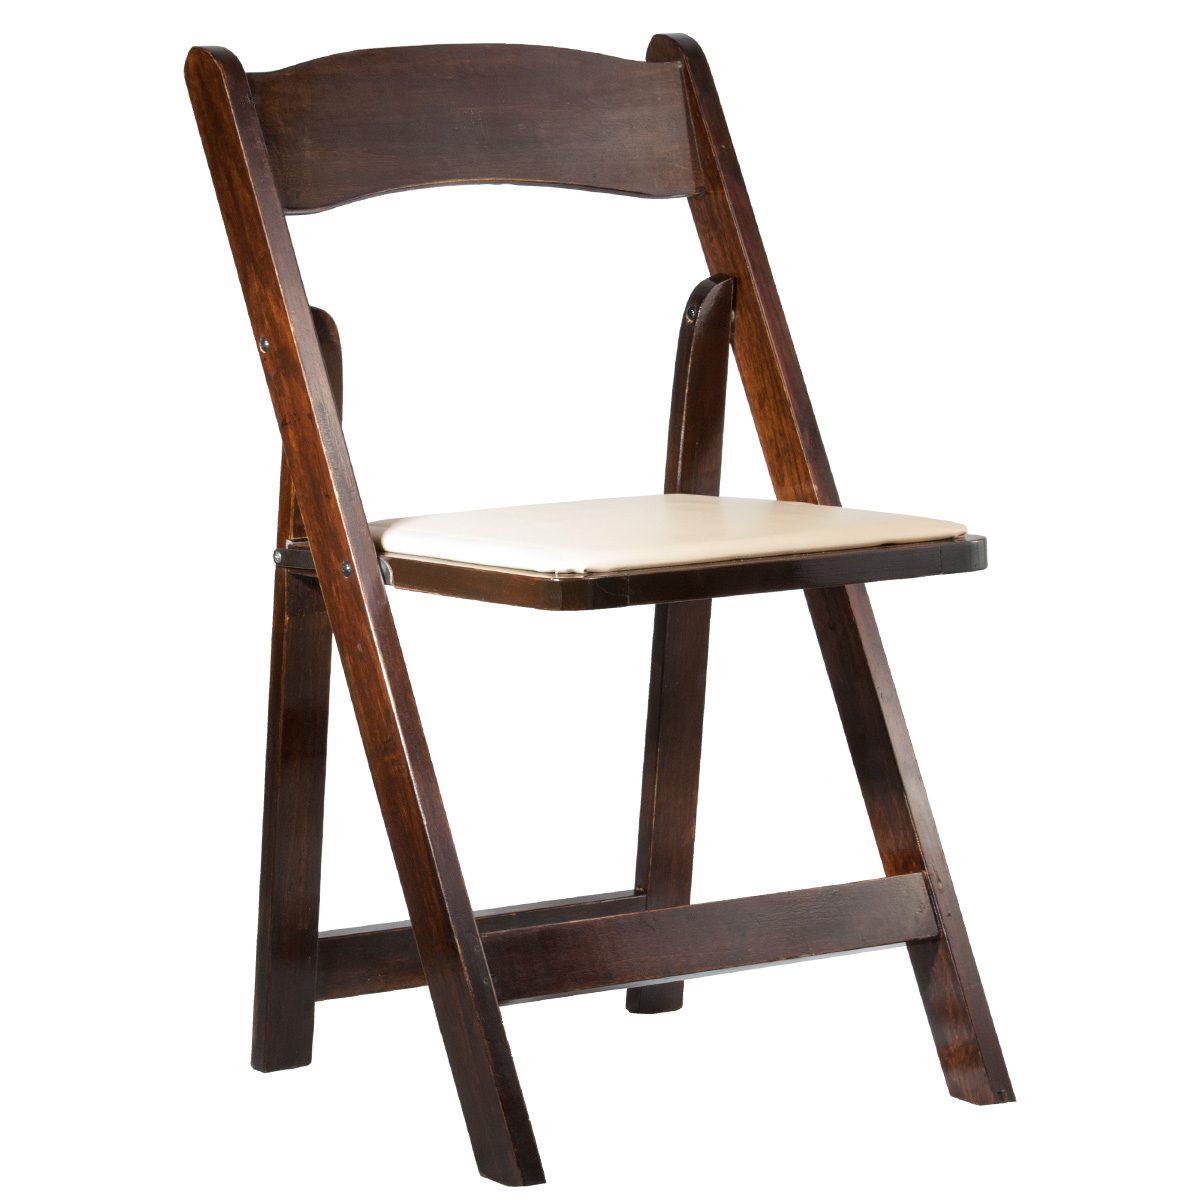 Details about    Wedding Chair 100 PACK Mahogany Wood Folding Chair w/Black Vinyl Padded Seat 